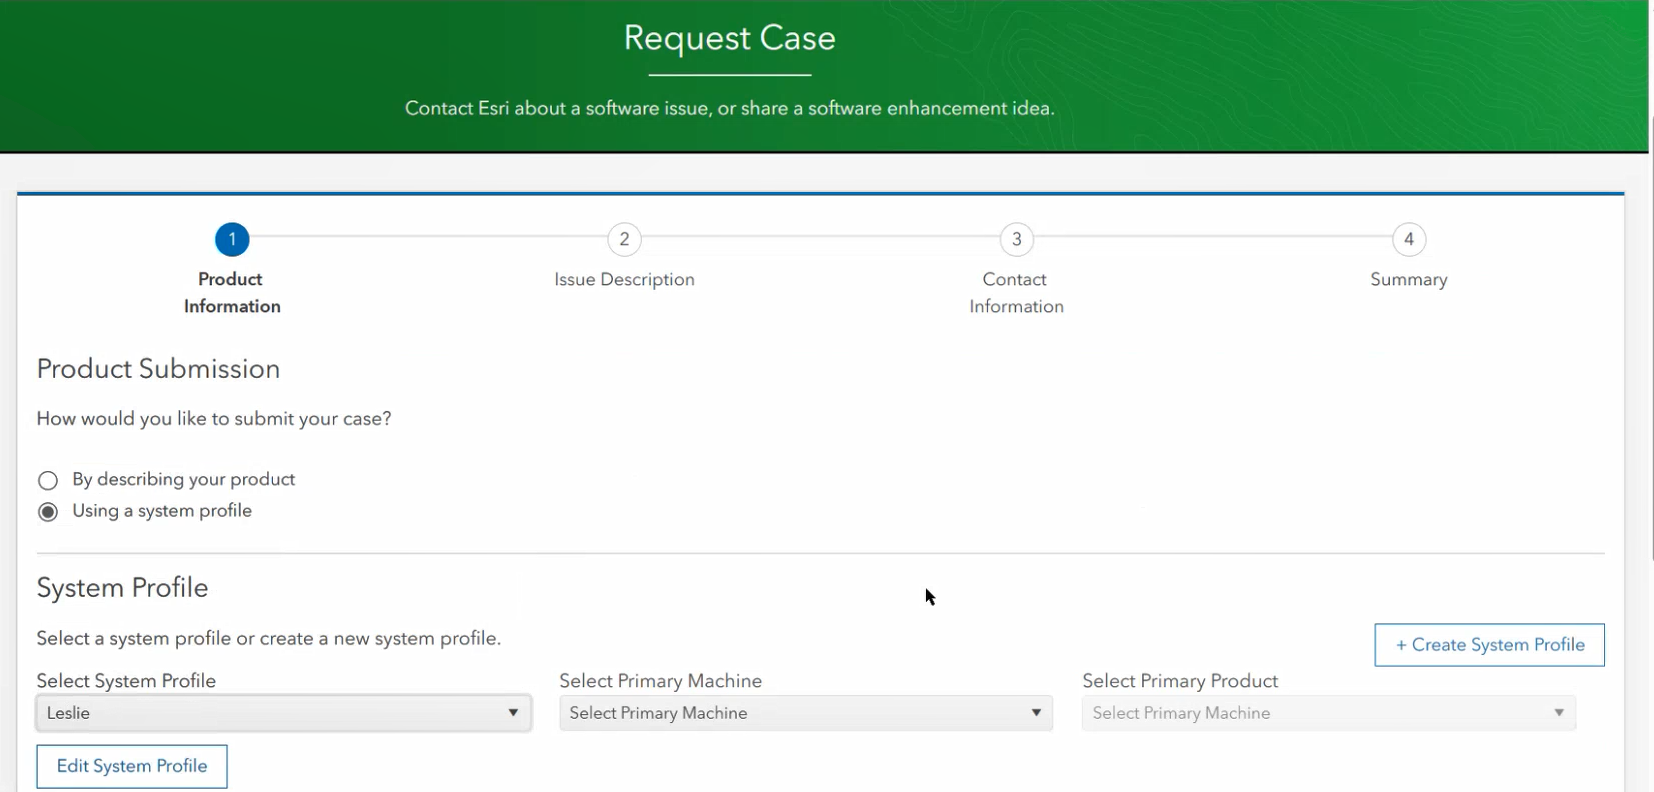 Request case landing page in My Esri.